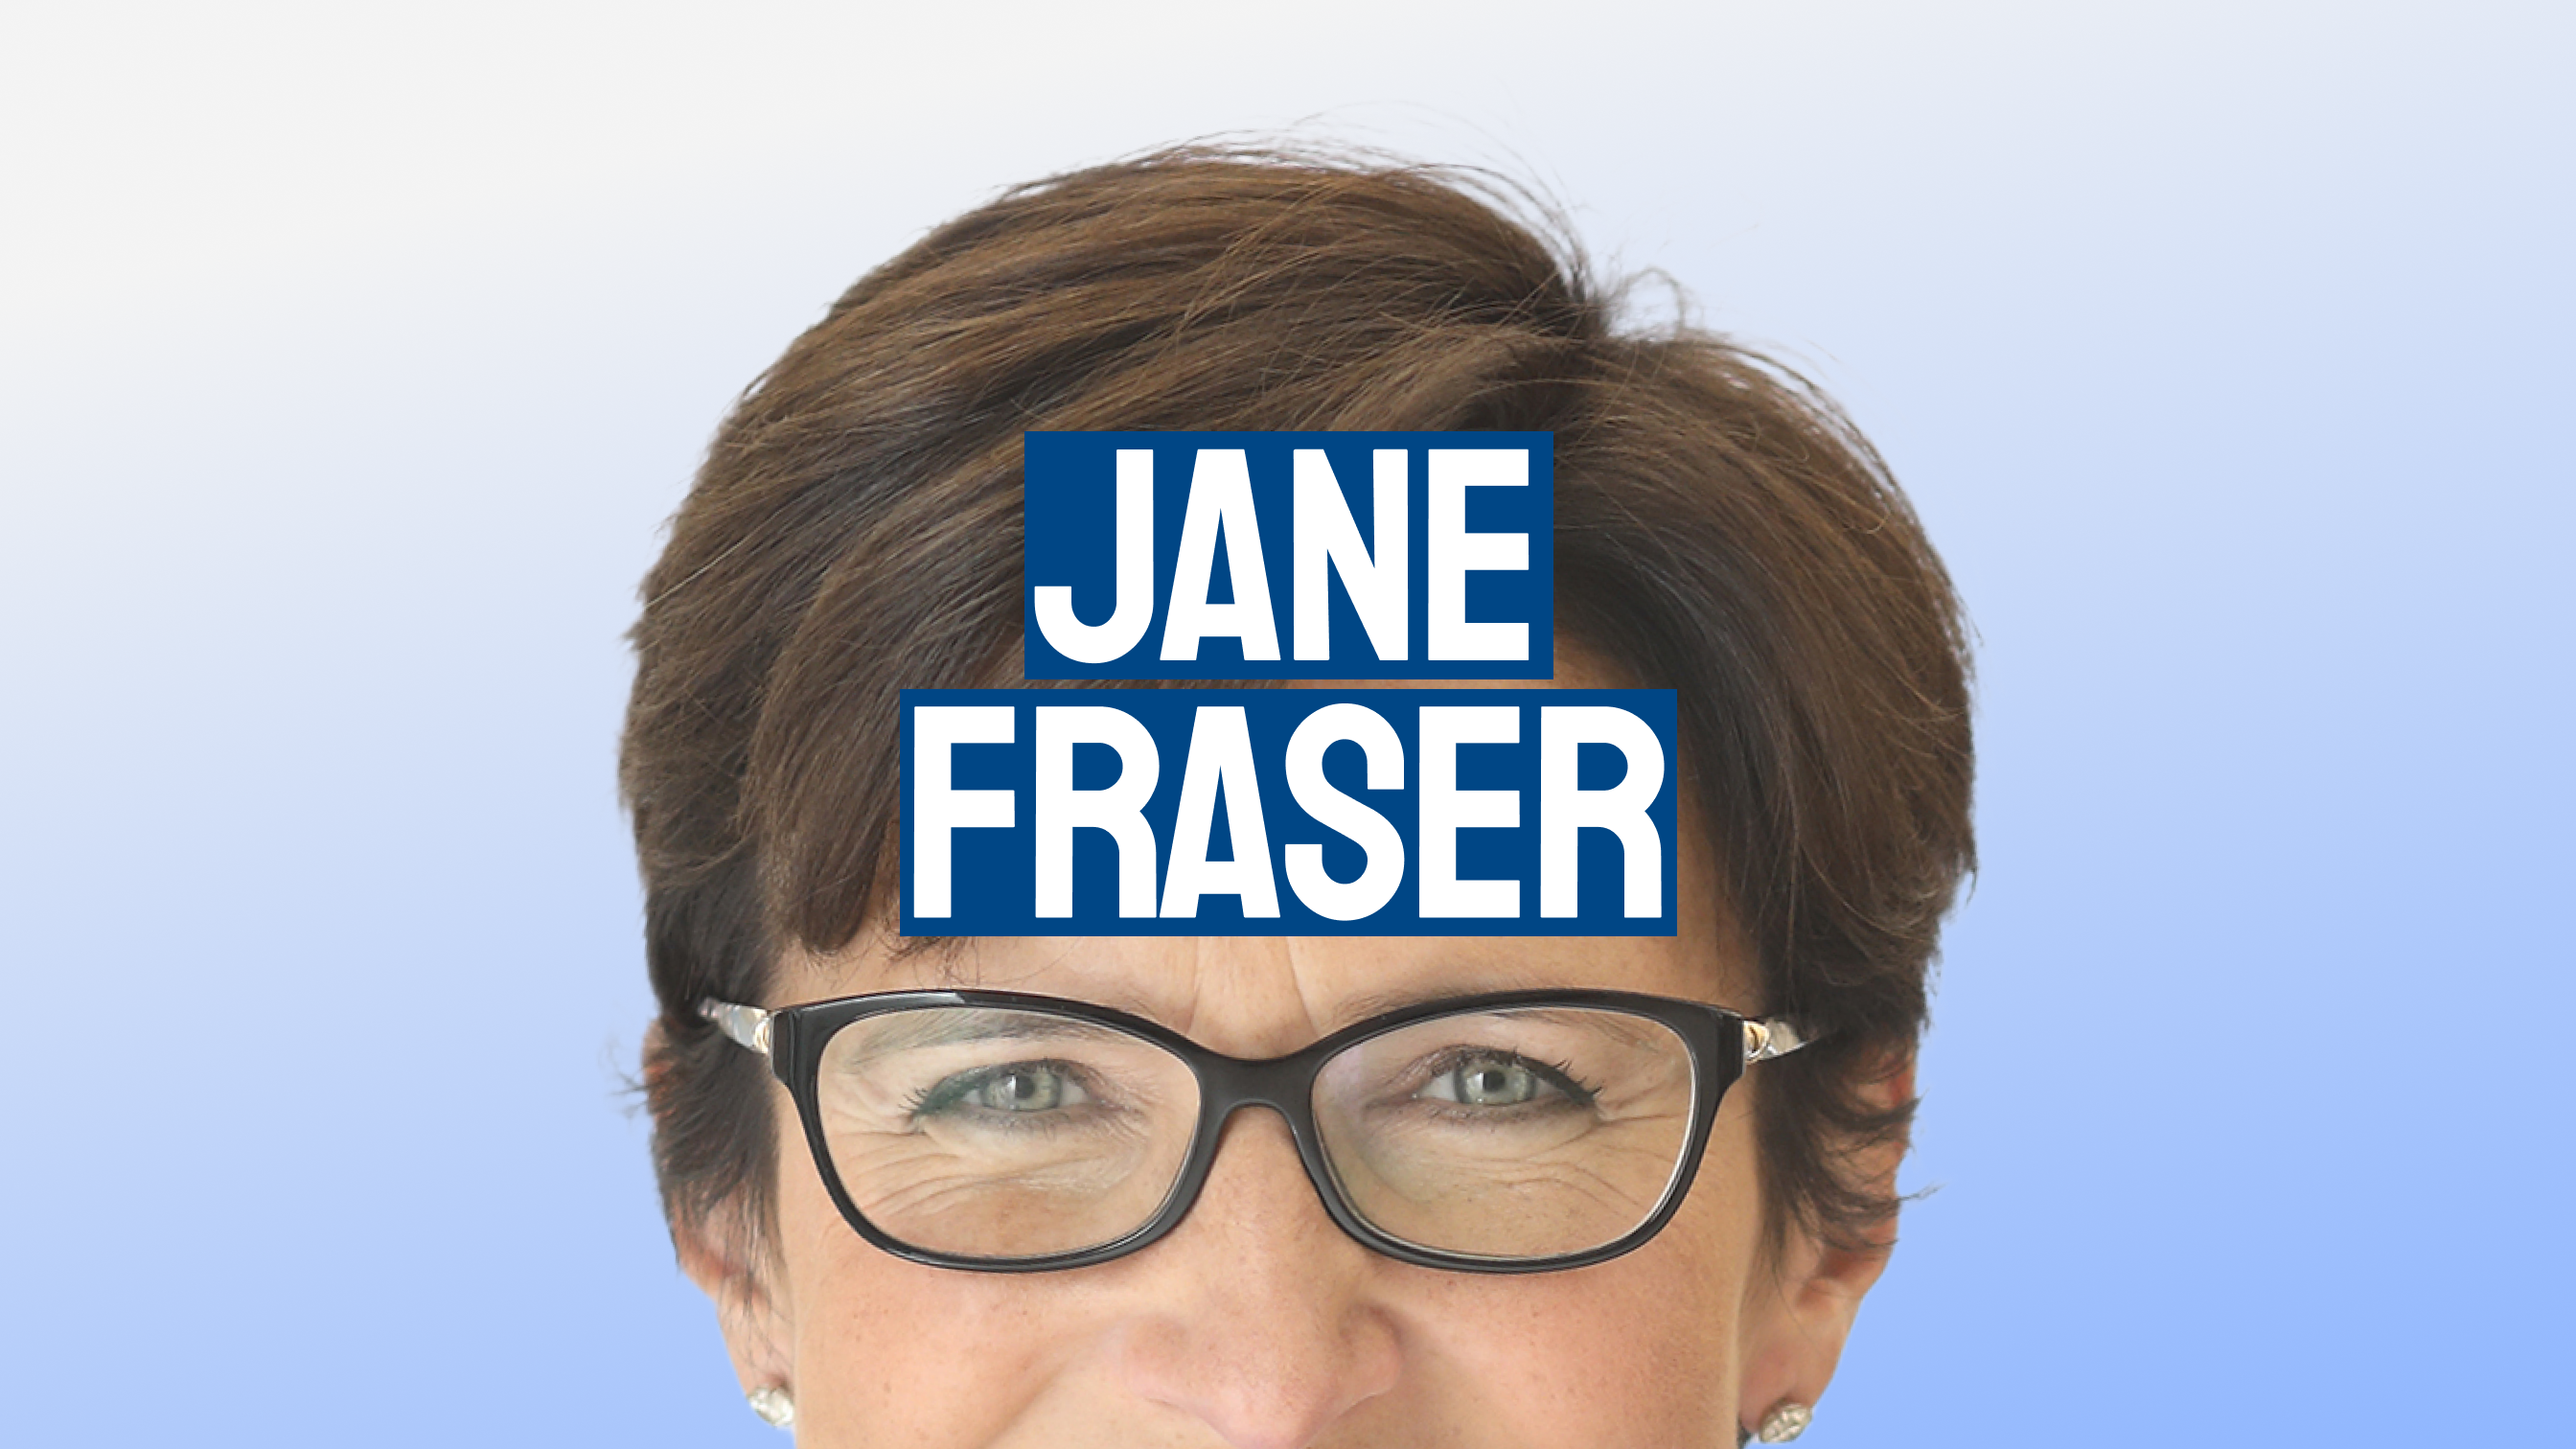 Jane Fraser, CEO of Citigroup: The first female leader of a major Wall Street bank